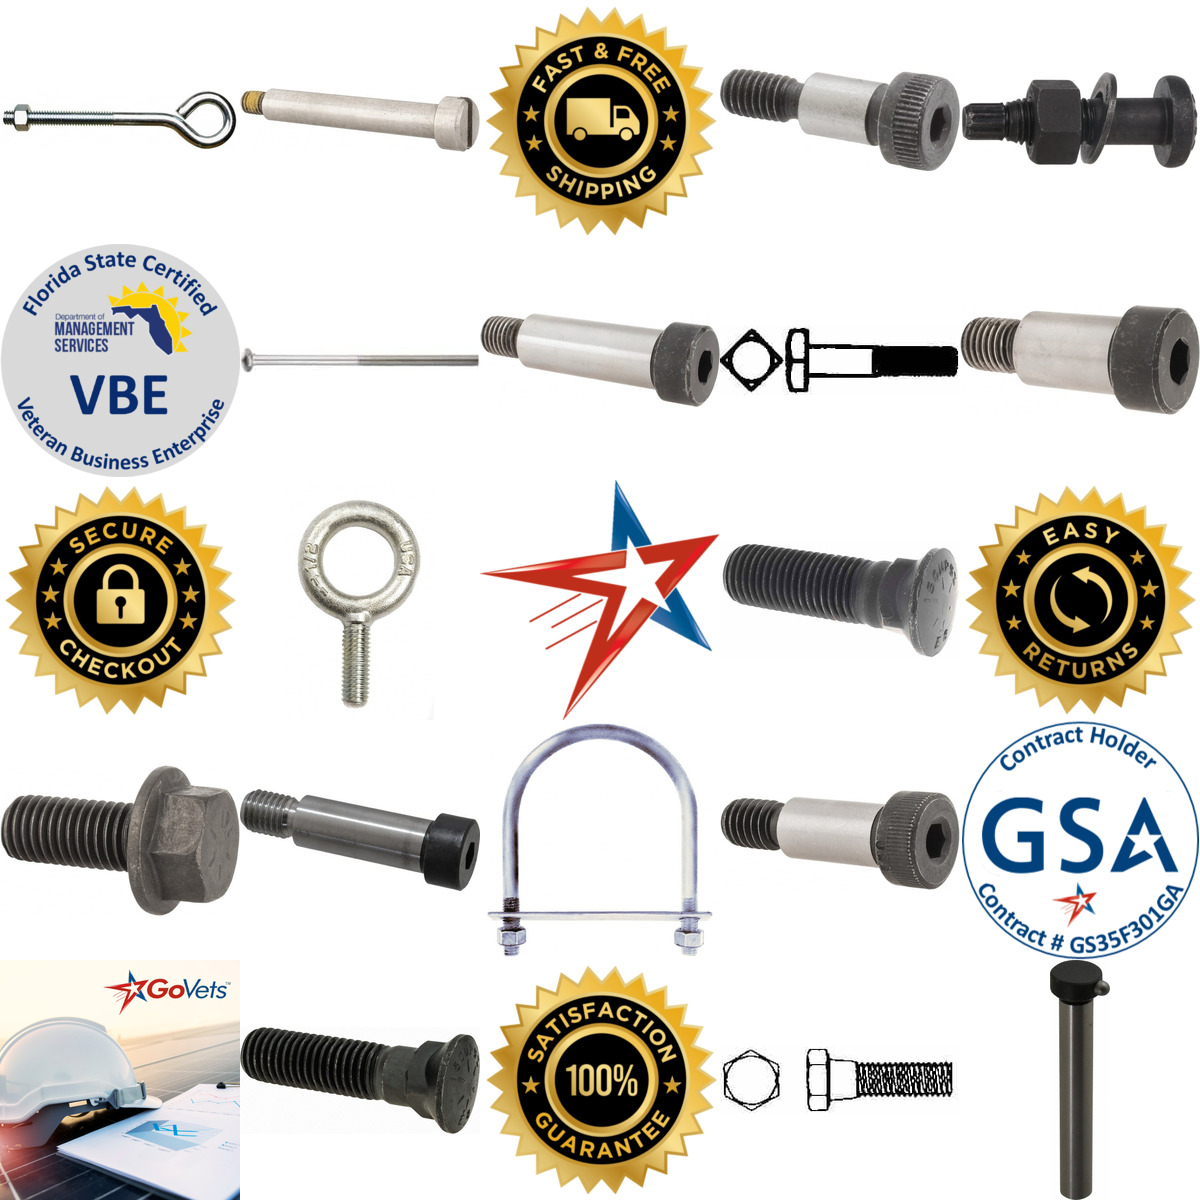 A selection of Bolts products on GoVets